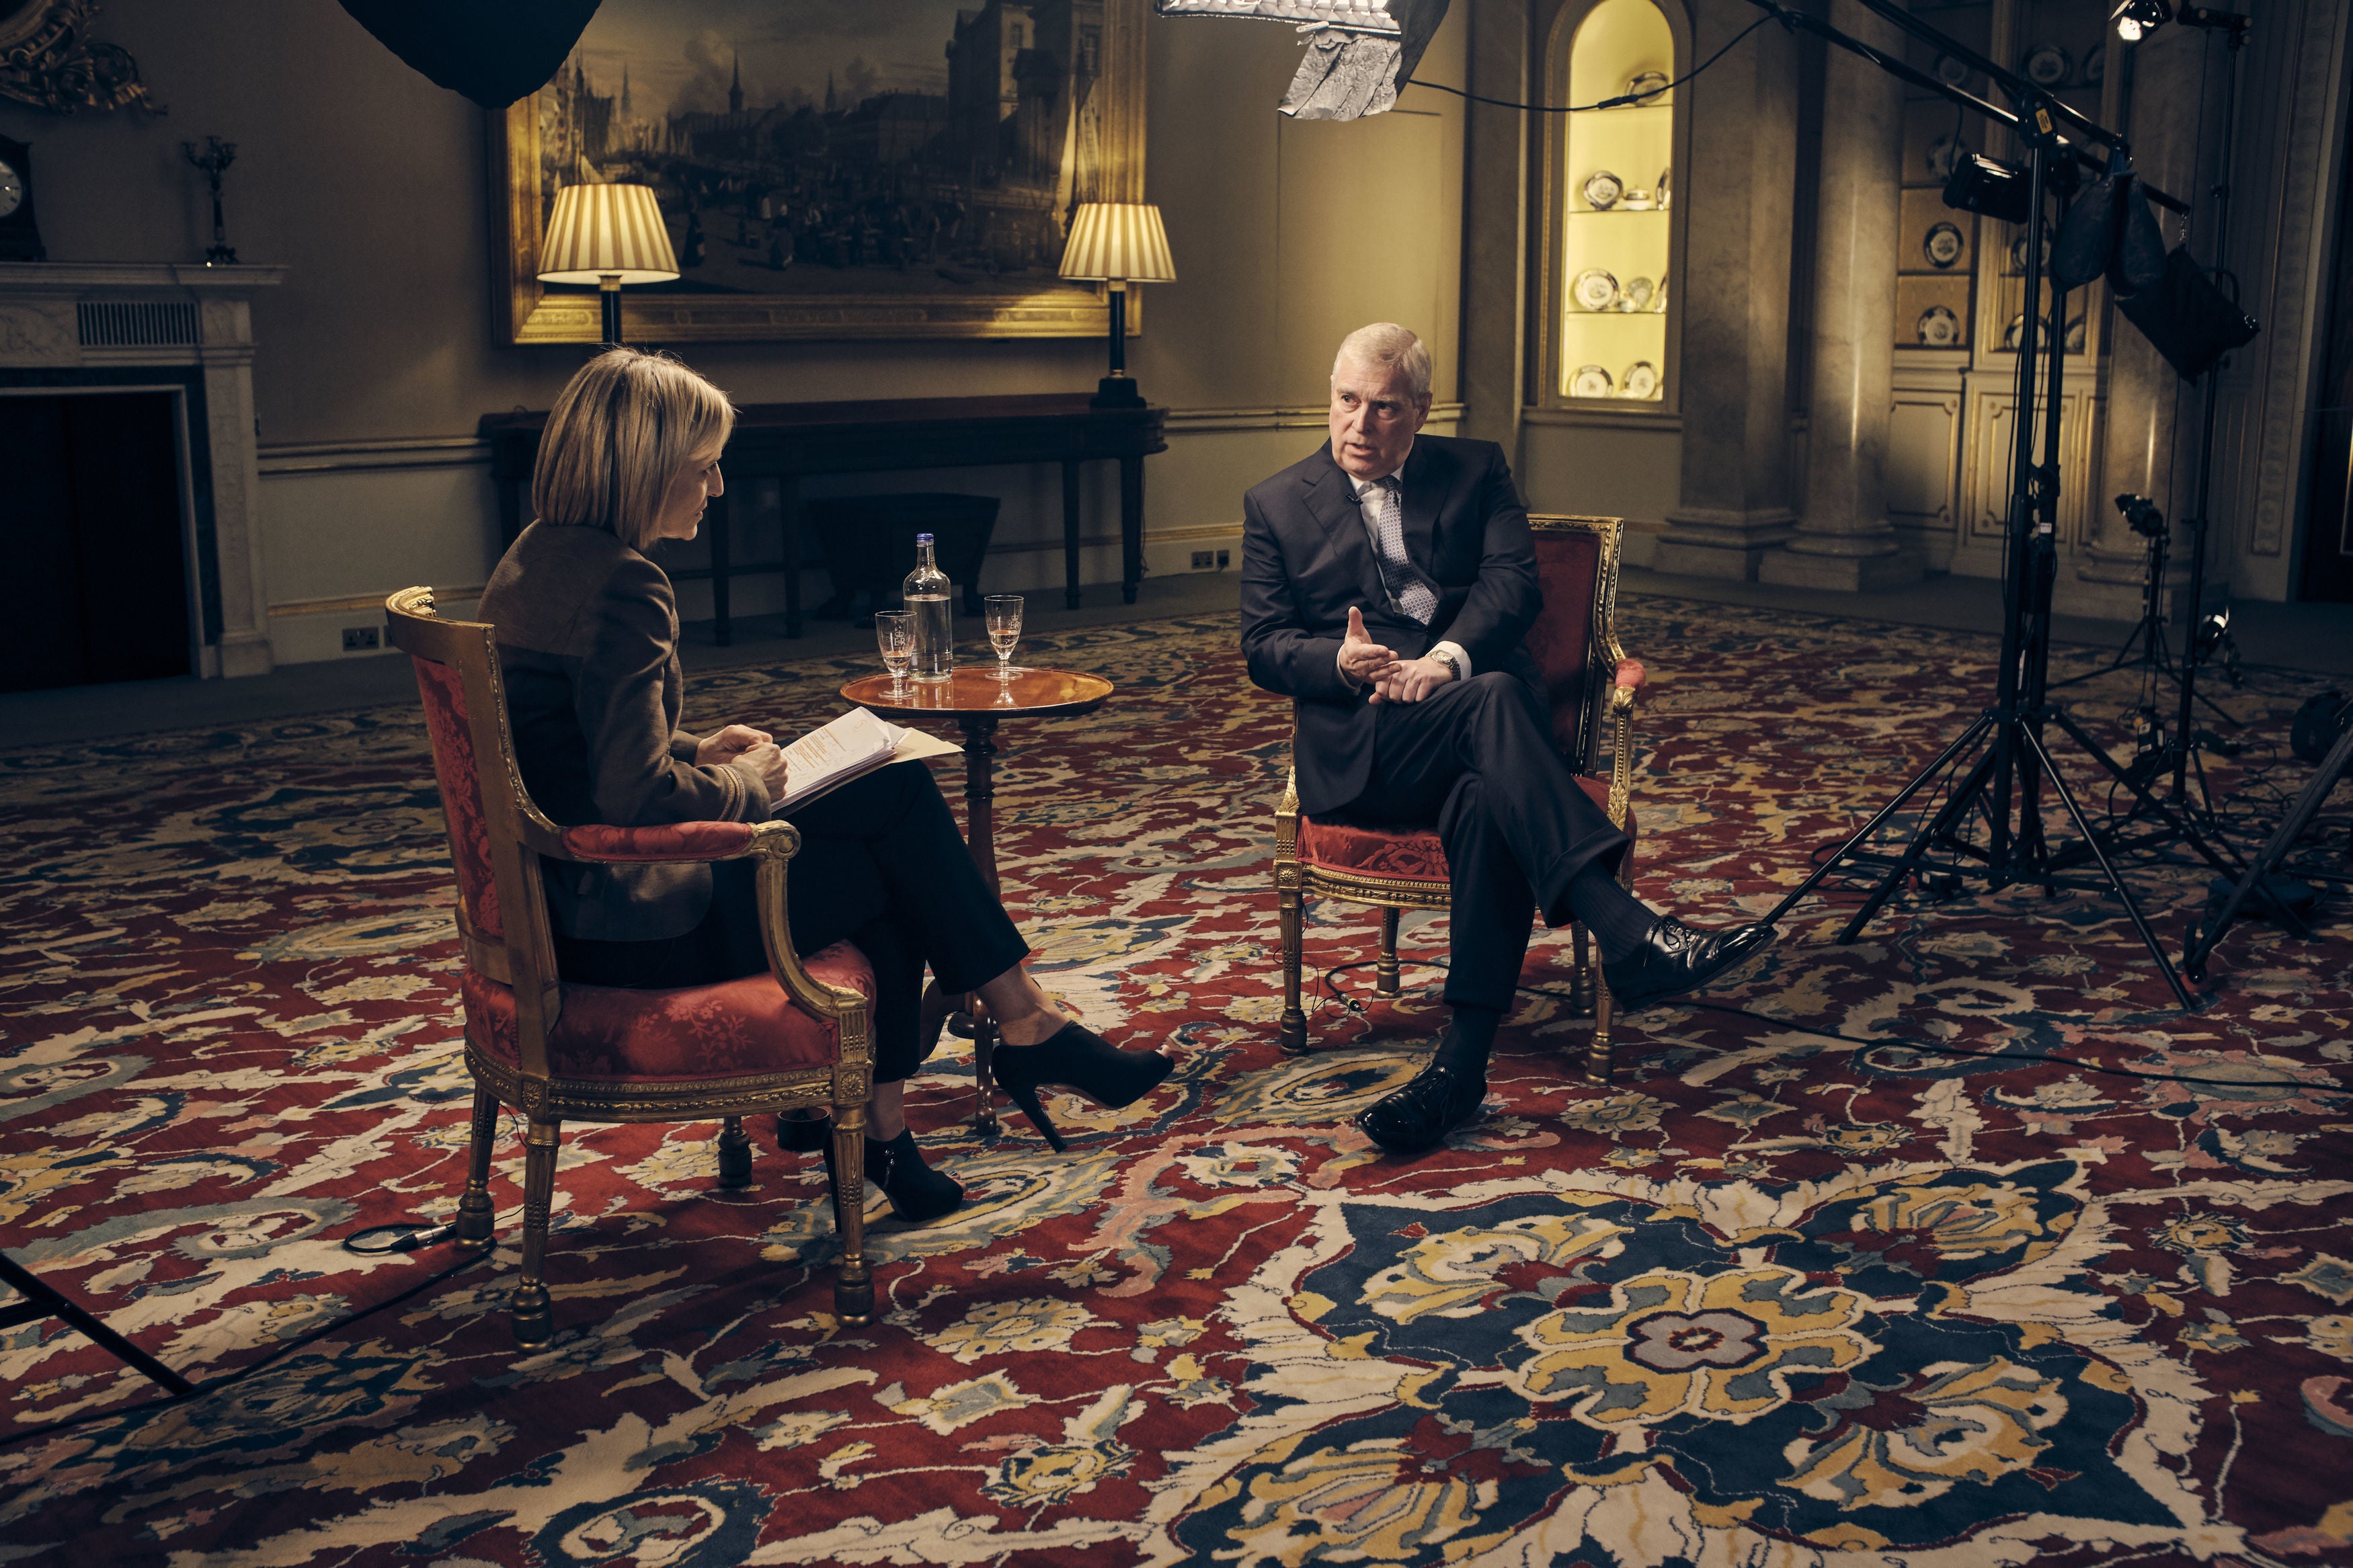 Emily Maitlis won a Royal Television Society award for her interview with the Duke of York over the Jeffrey Epstein scandal in 2019 (Mark Harrison/BBC)